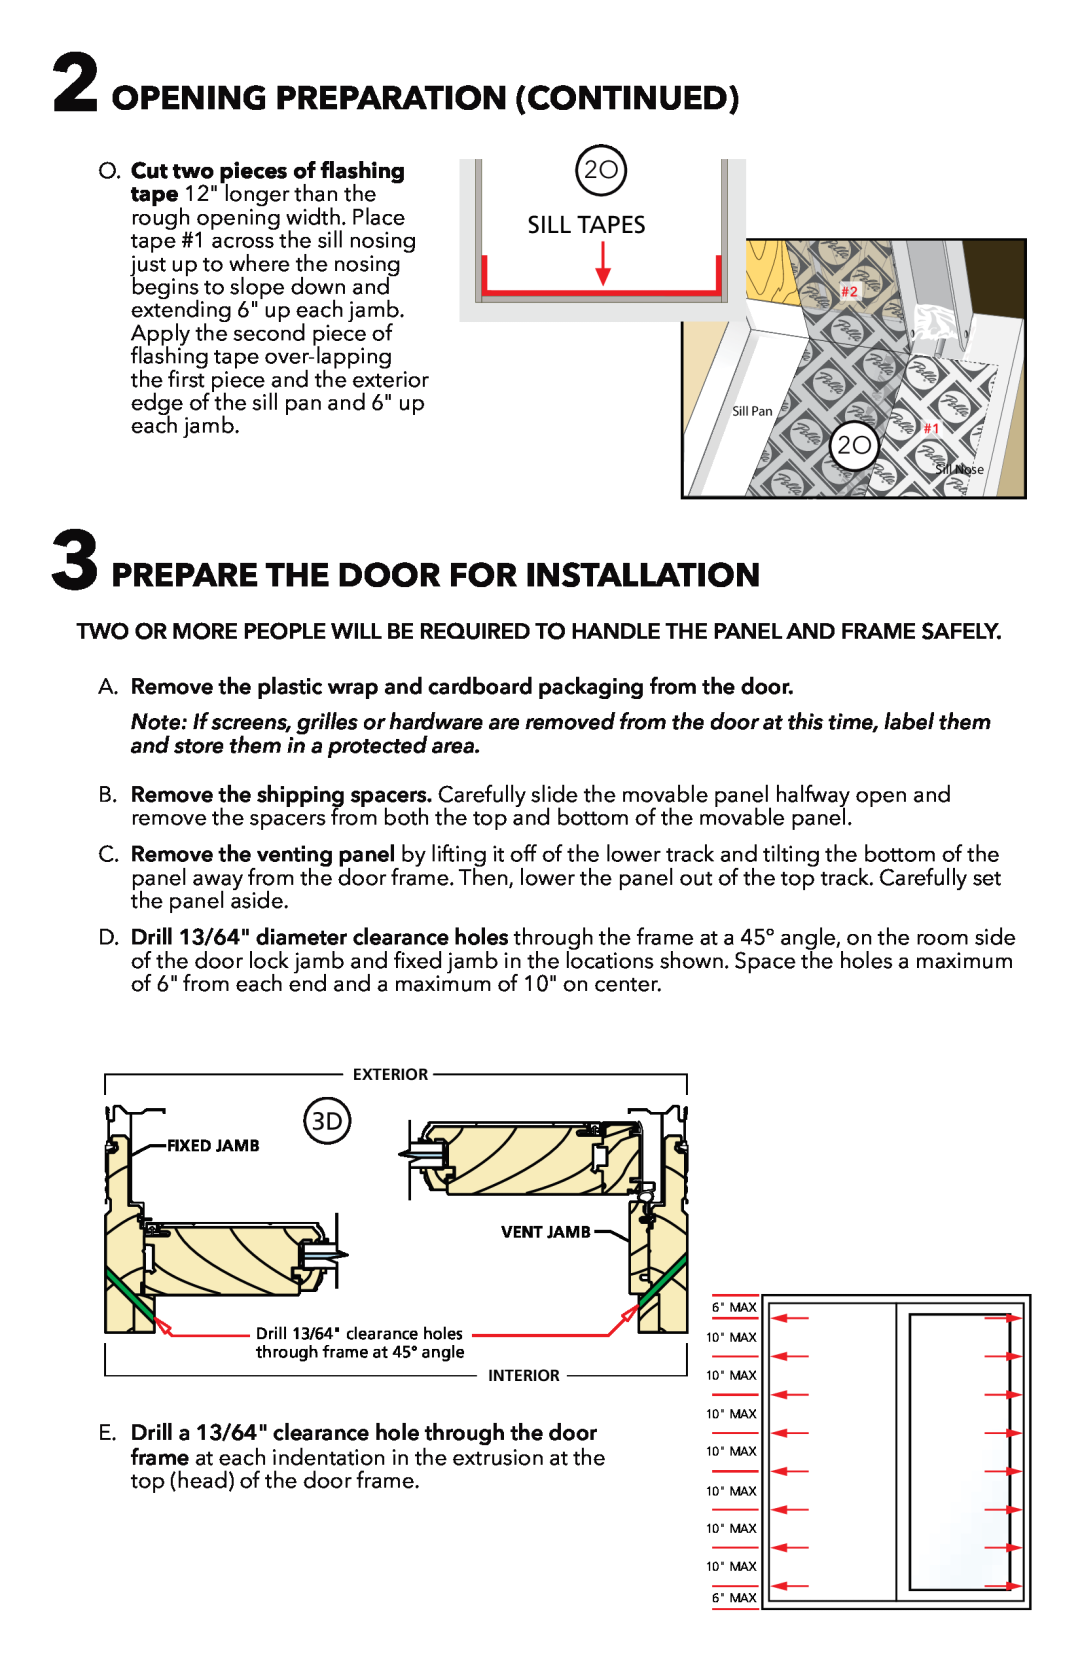 Pella 81CM0100 installation instructions Prepare The Door For Installation, 3D2D, Sill Tapes, Opening Preparation Continued 